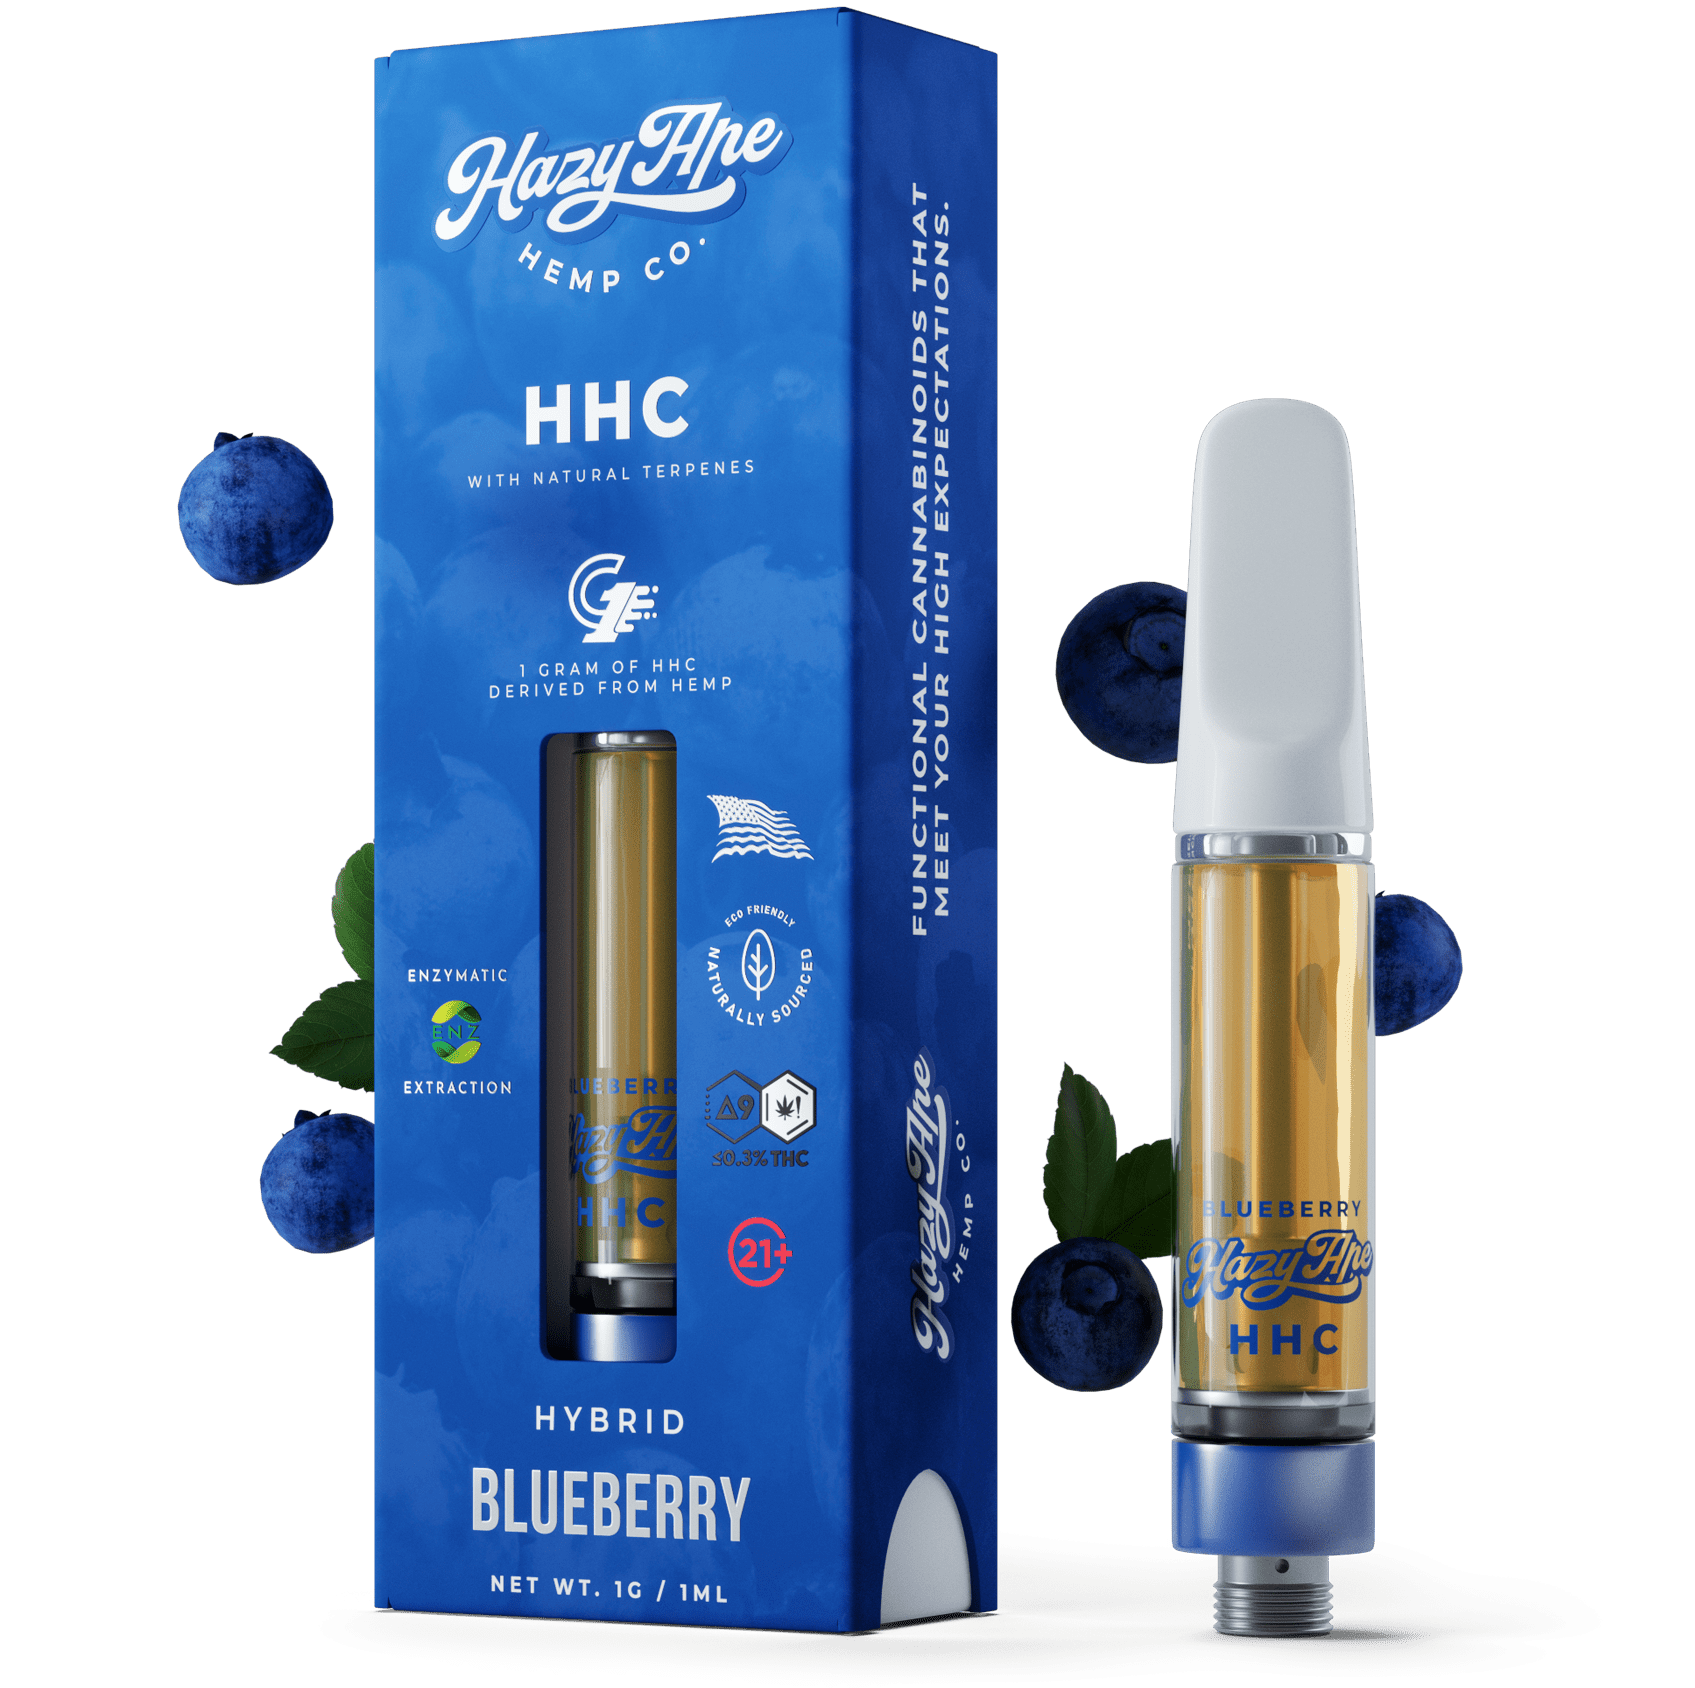 HHC Vape - Top Rated and 3rd Party Lab Tested.